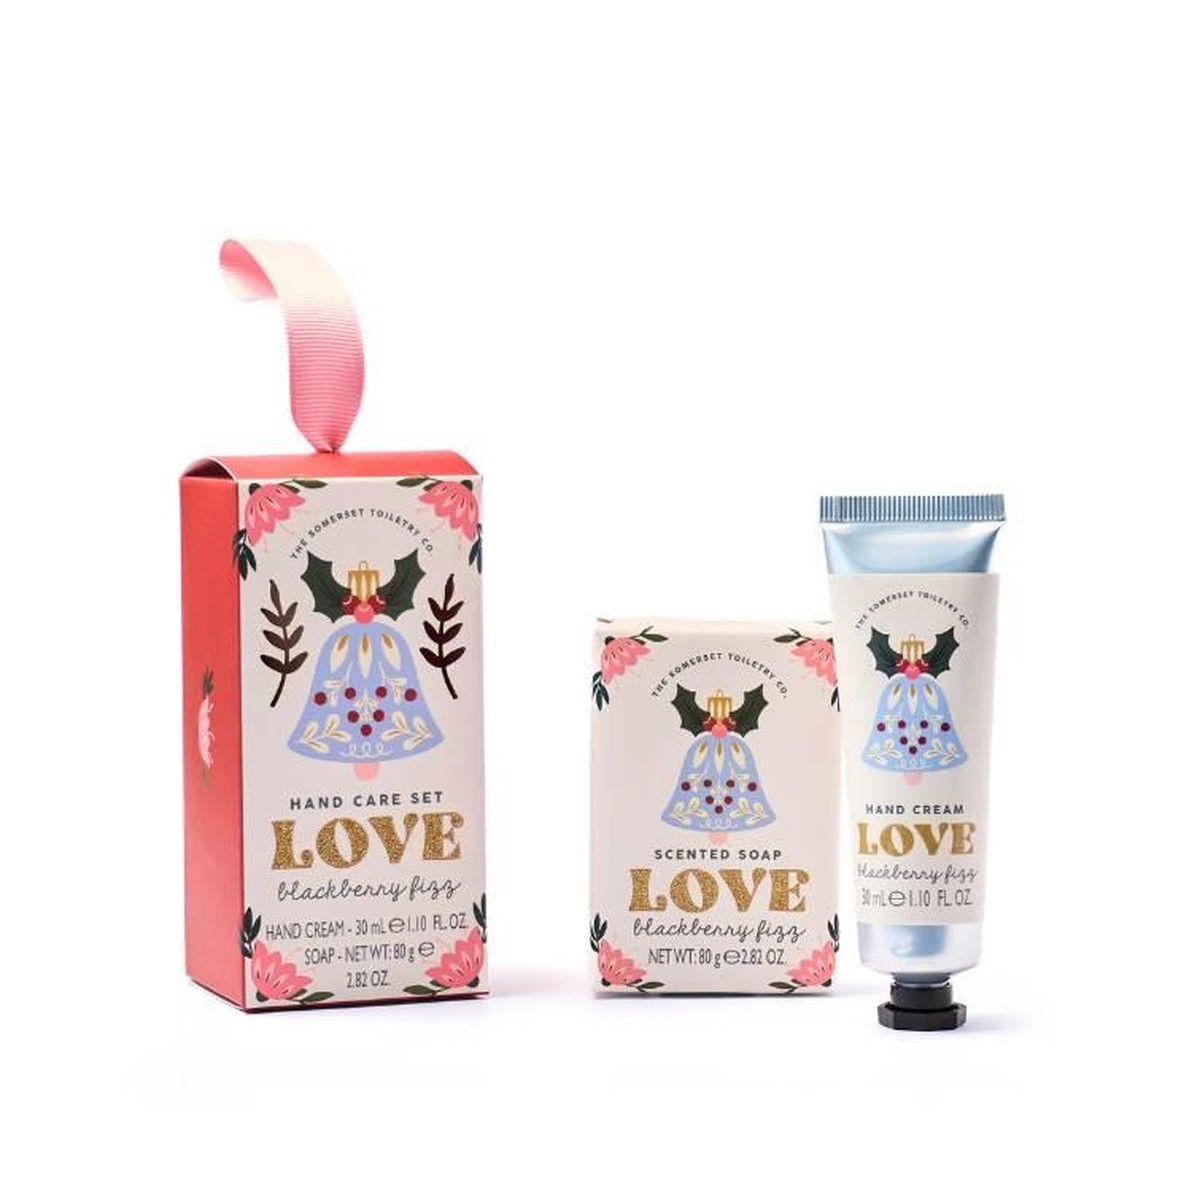 The Somerset Toiletry FESTIVE GIFTING Savon Winter Wishes Love-blackberry fizz  80gr